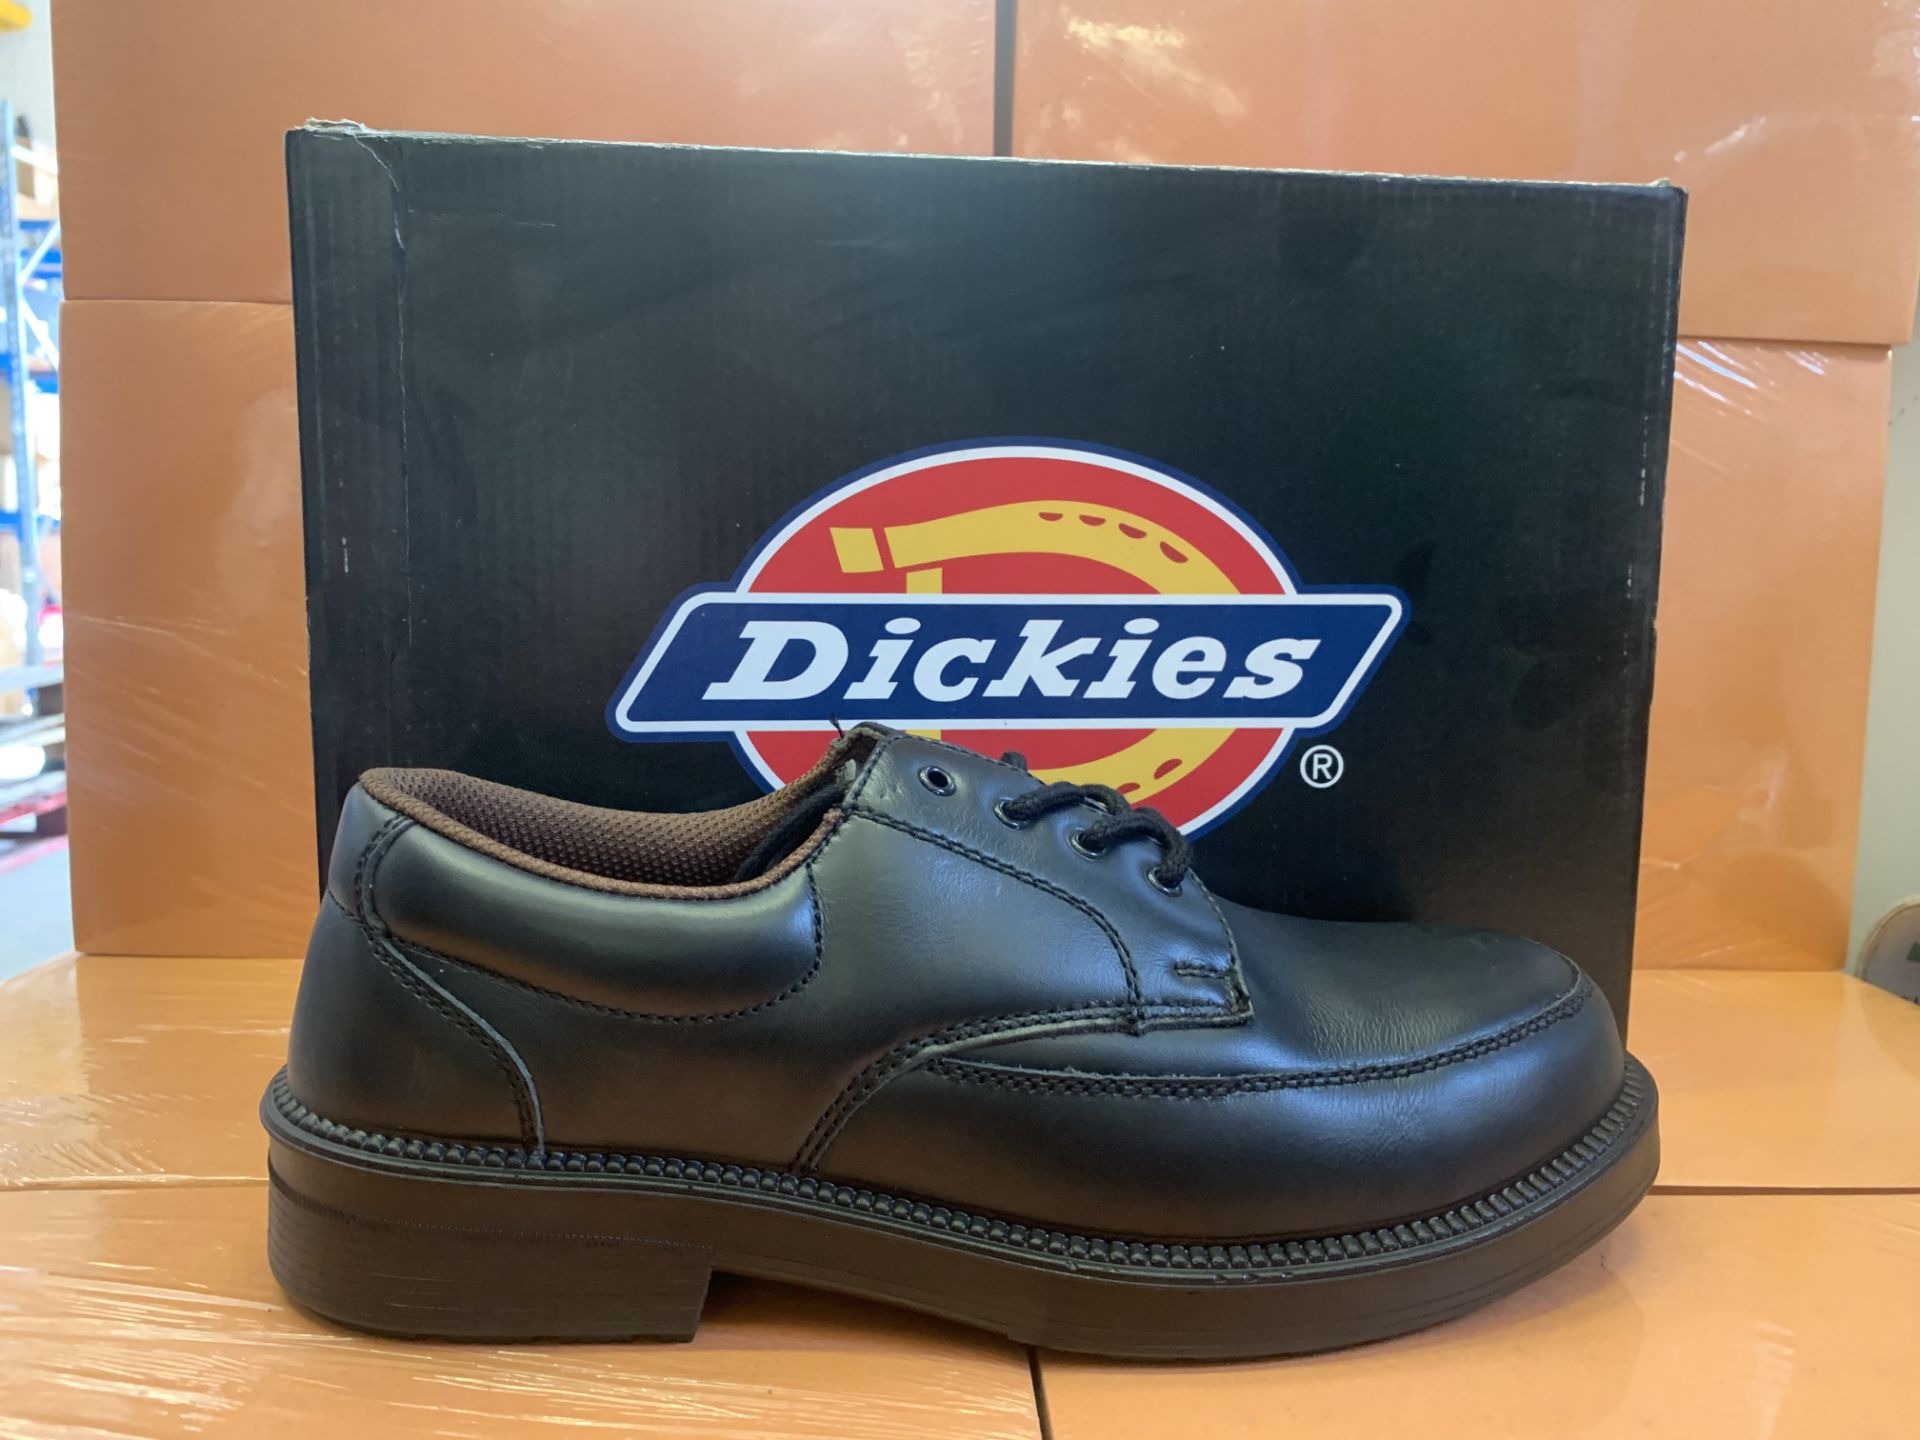 6 X BRAND NEW DICKIES EXECUTIVE SAFETY SHOES 4 X SIZE 11 AND 2 X SIZE 5.5